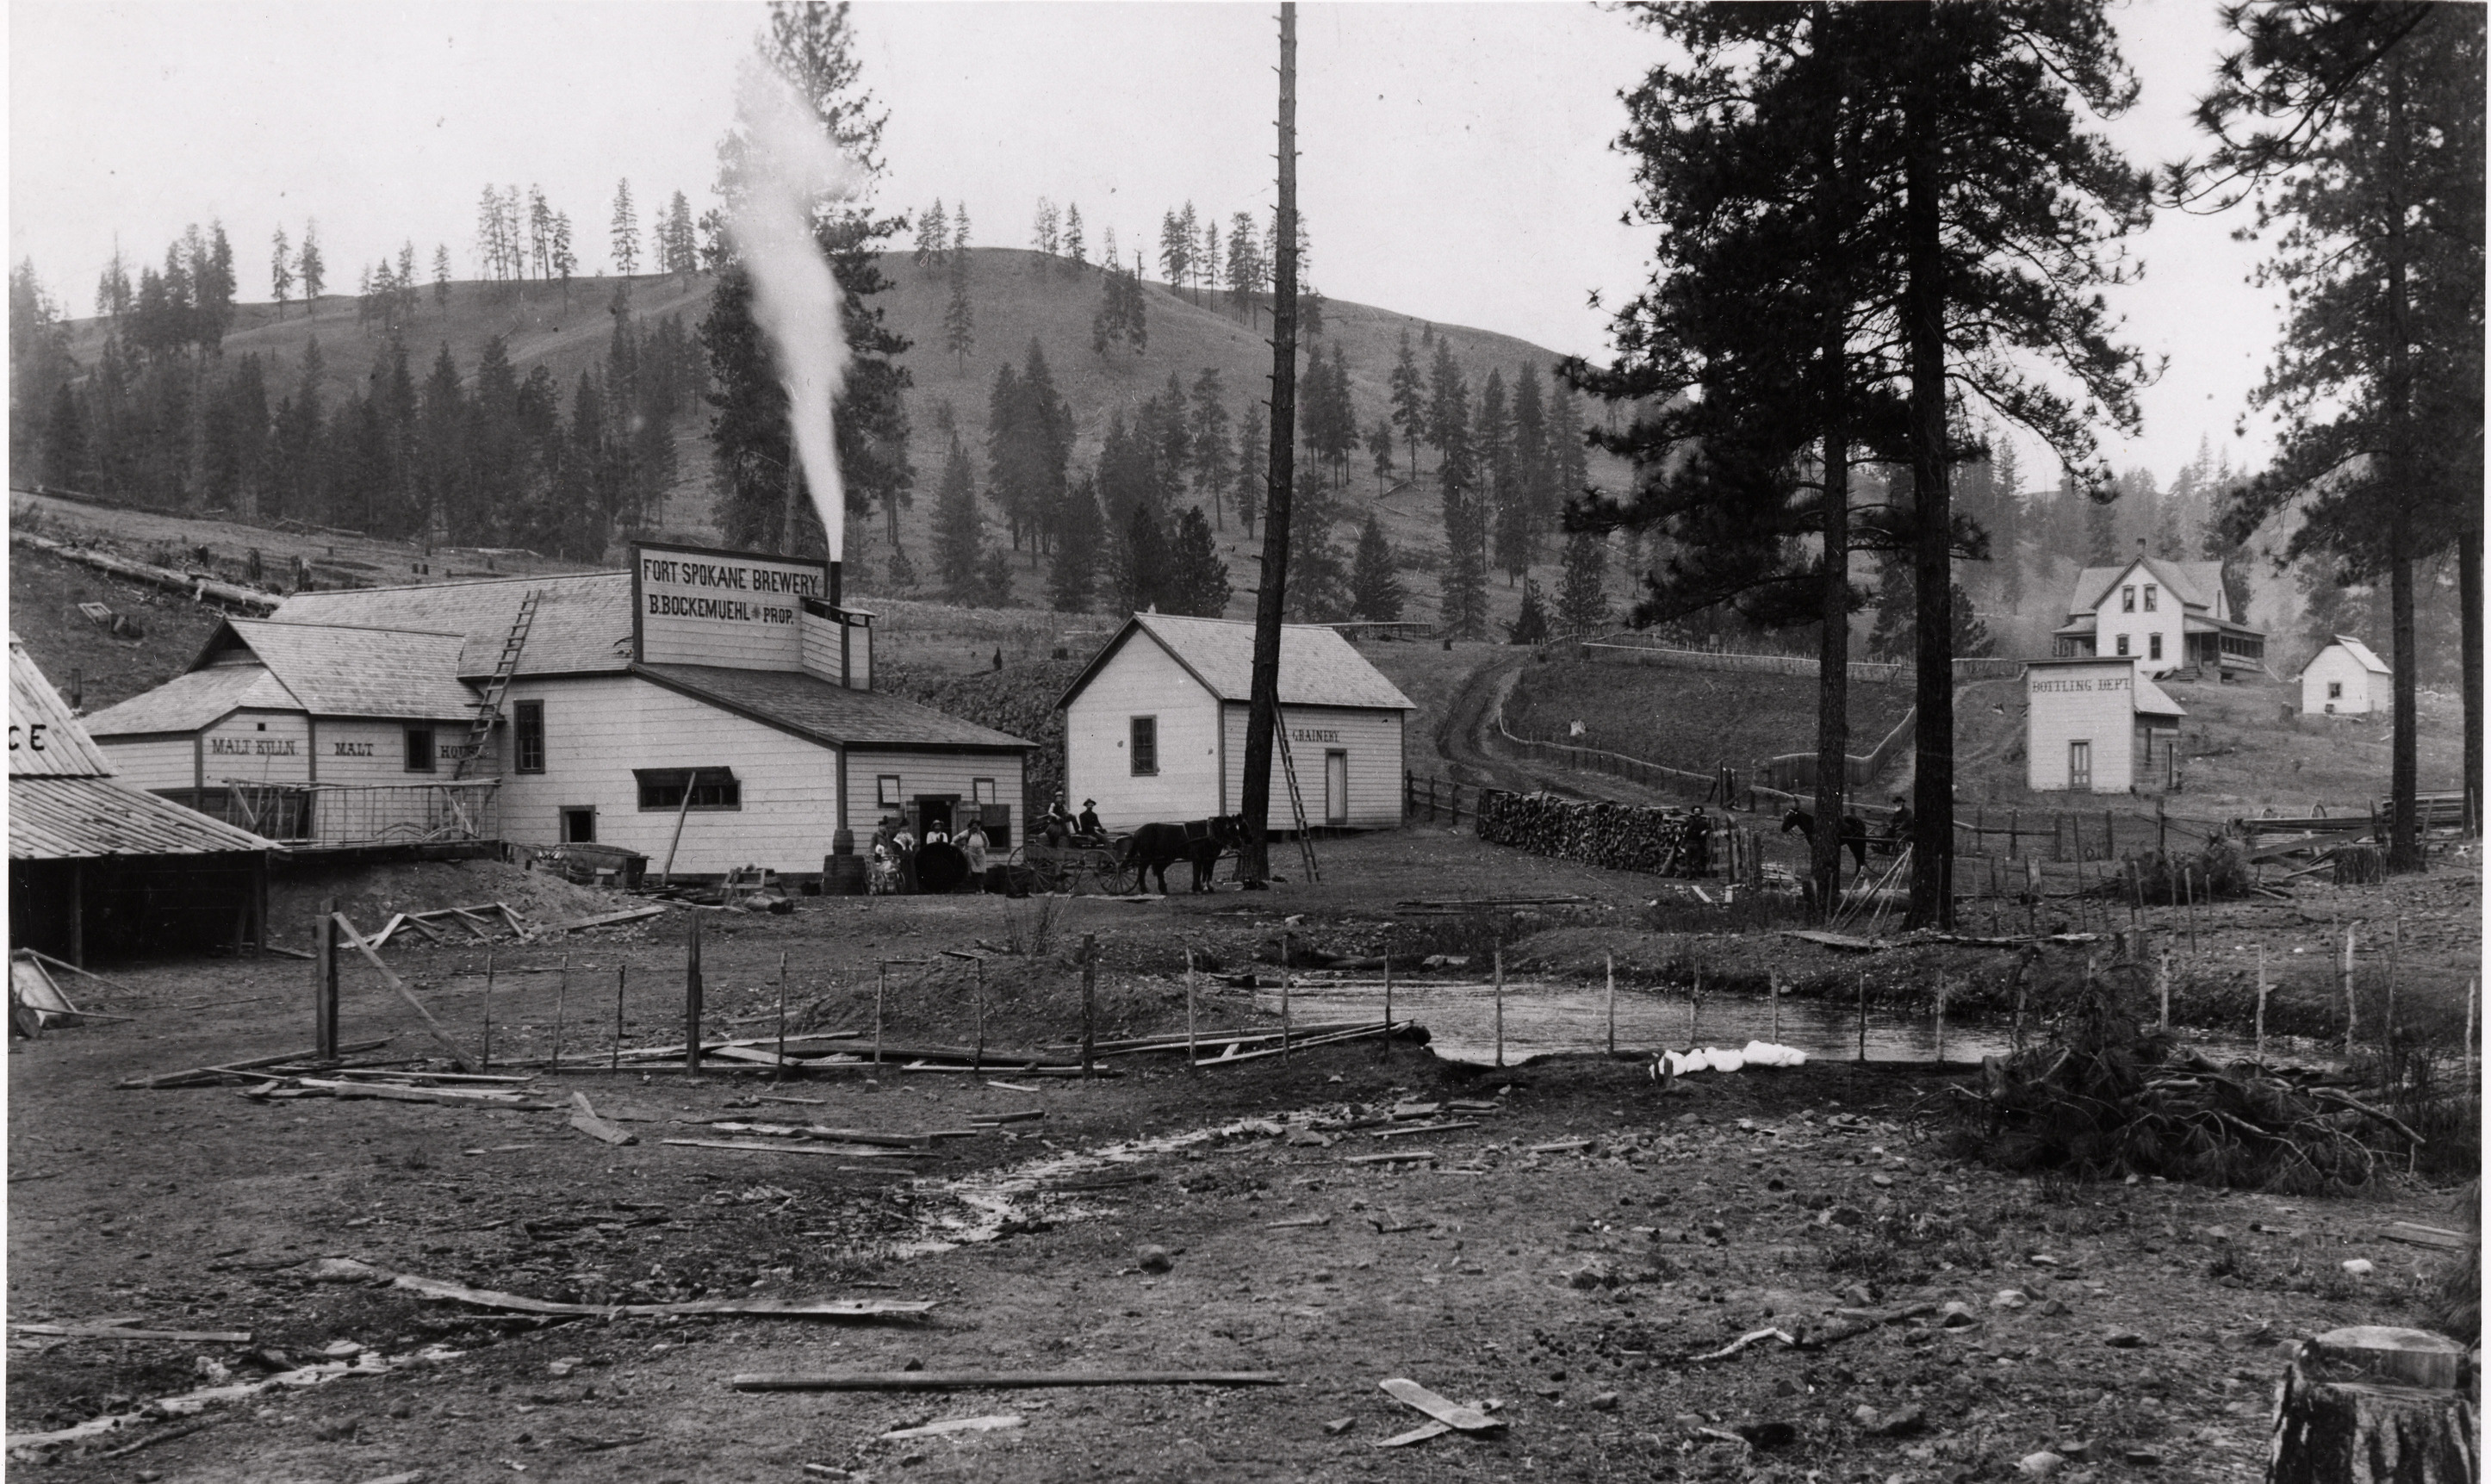 Black and white photograph of several plain wooden buildings clustered on a hill along a dirt road